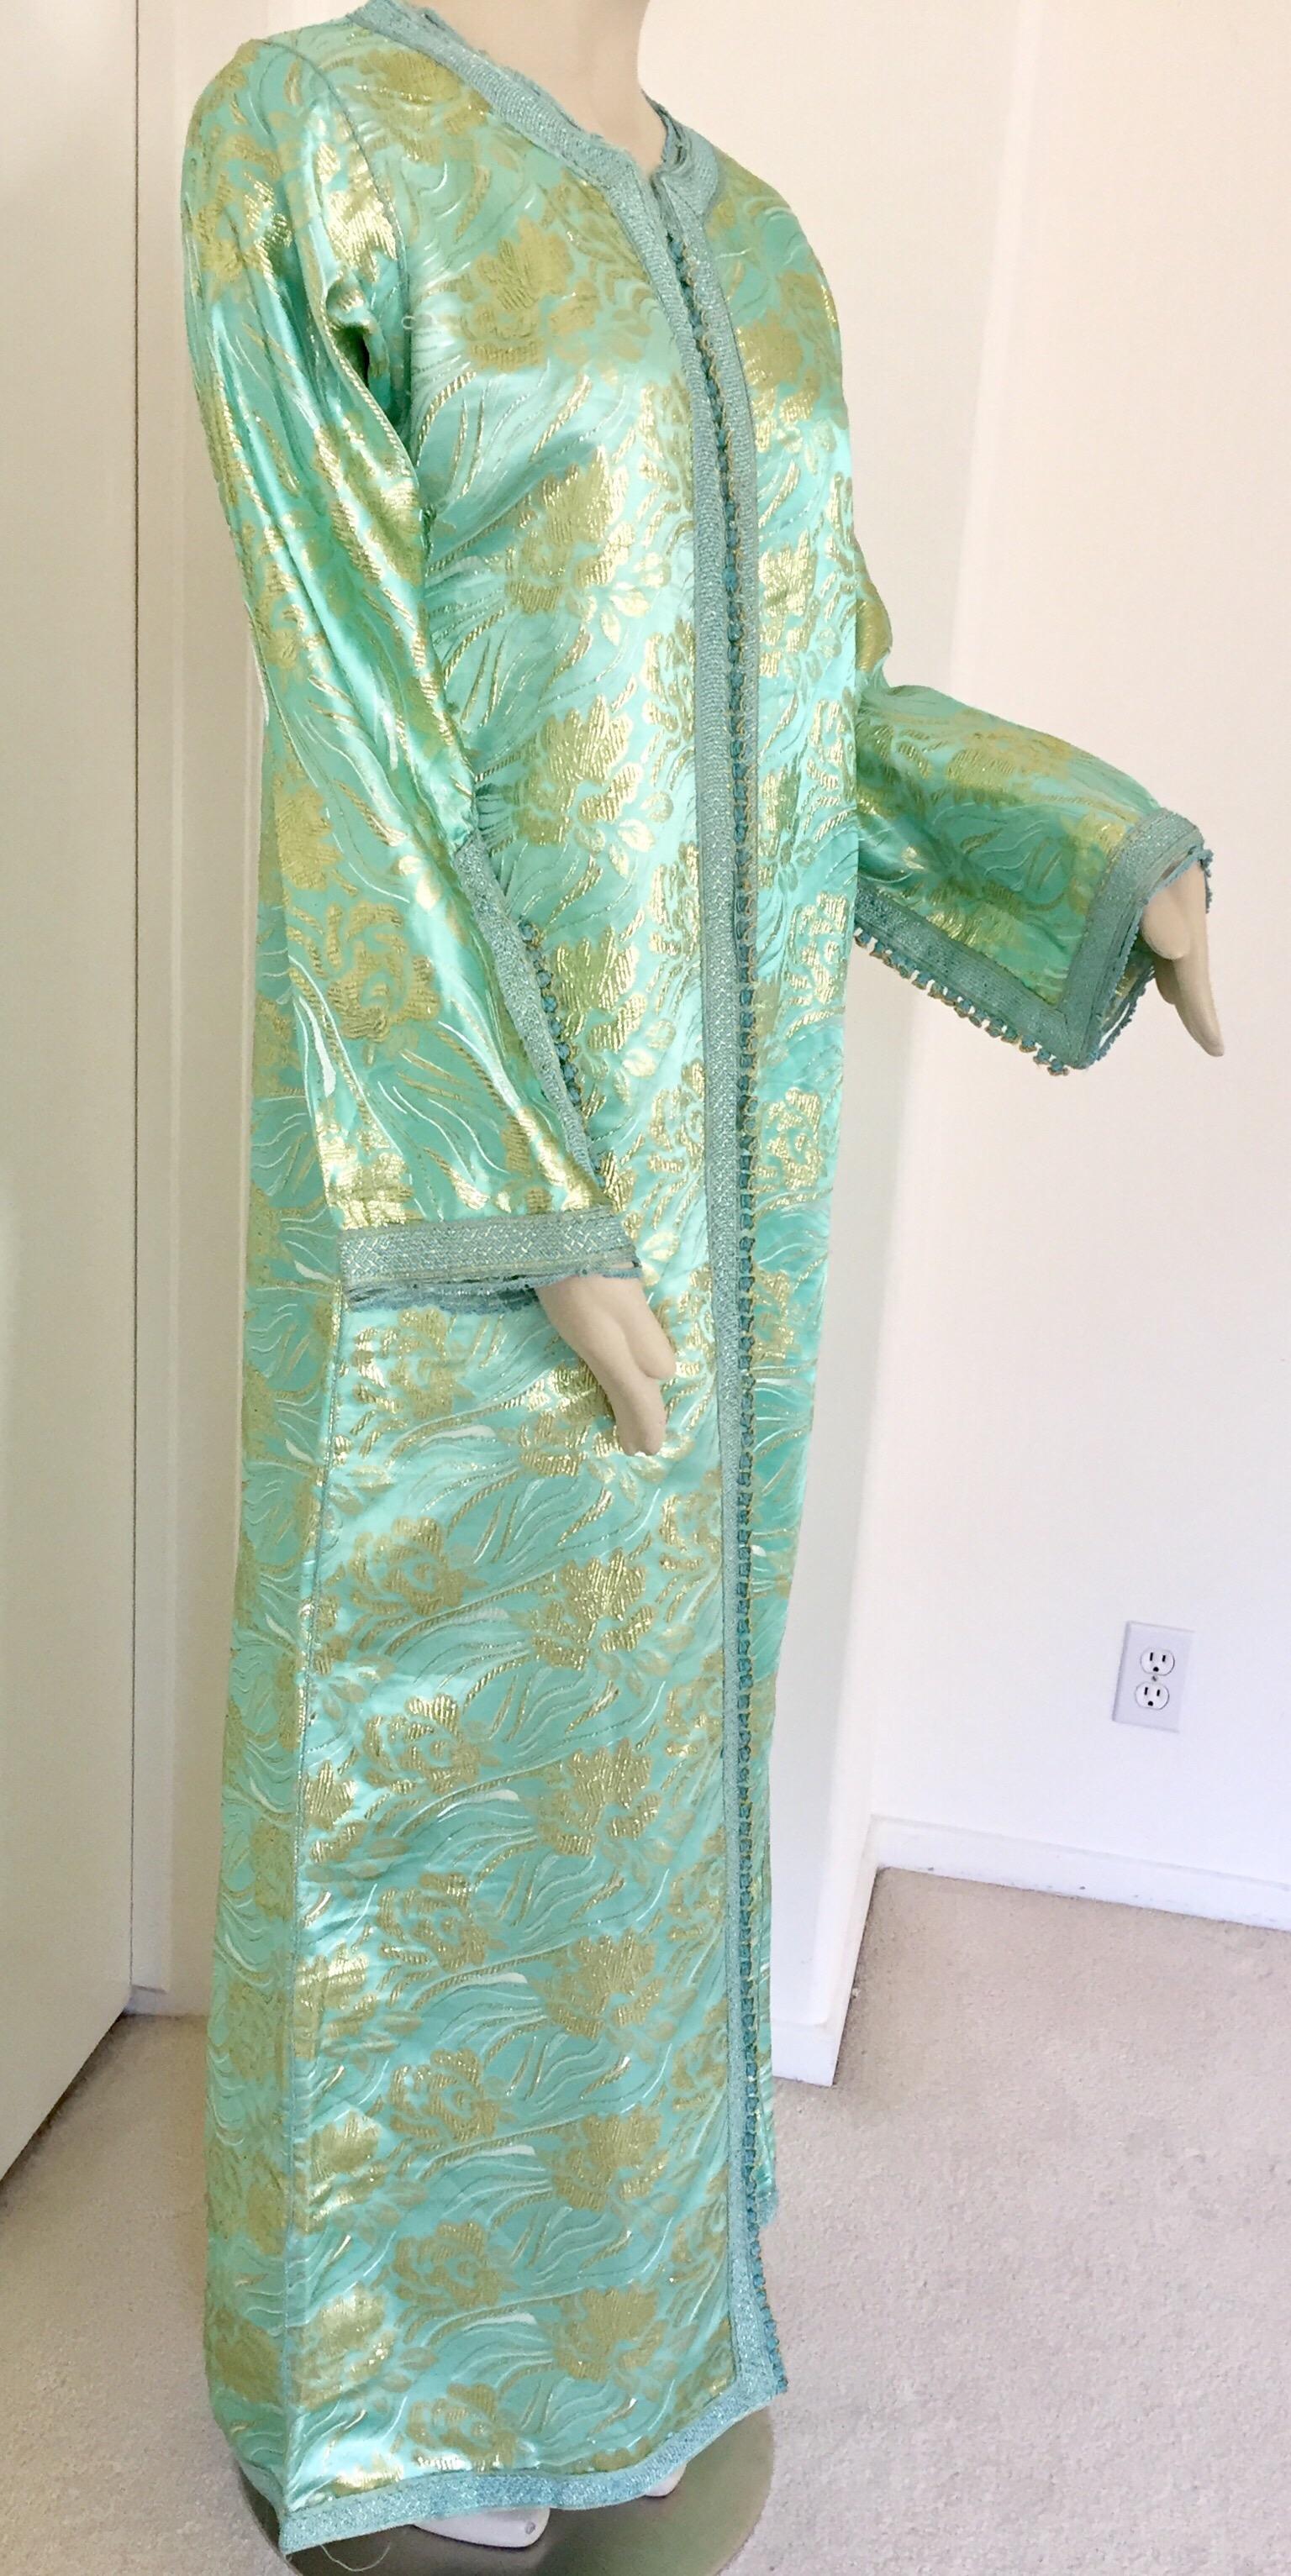 Elegant Moroccan caftan in turquoise and gold floral lame metallic and embroidered trim,
circa 1970s.
This long maxi dress kaftan is embroidered and embellished entirely by hand. 
It’s crafted in Morocco and tailored for a relaxed fit.
One of a kind